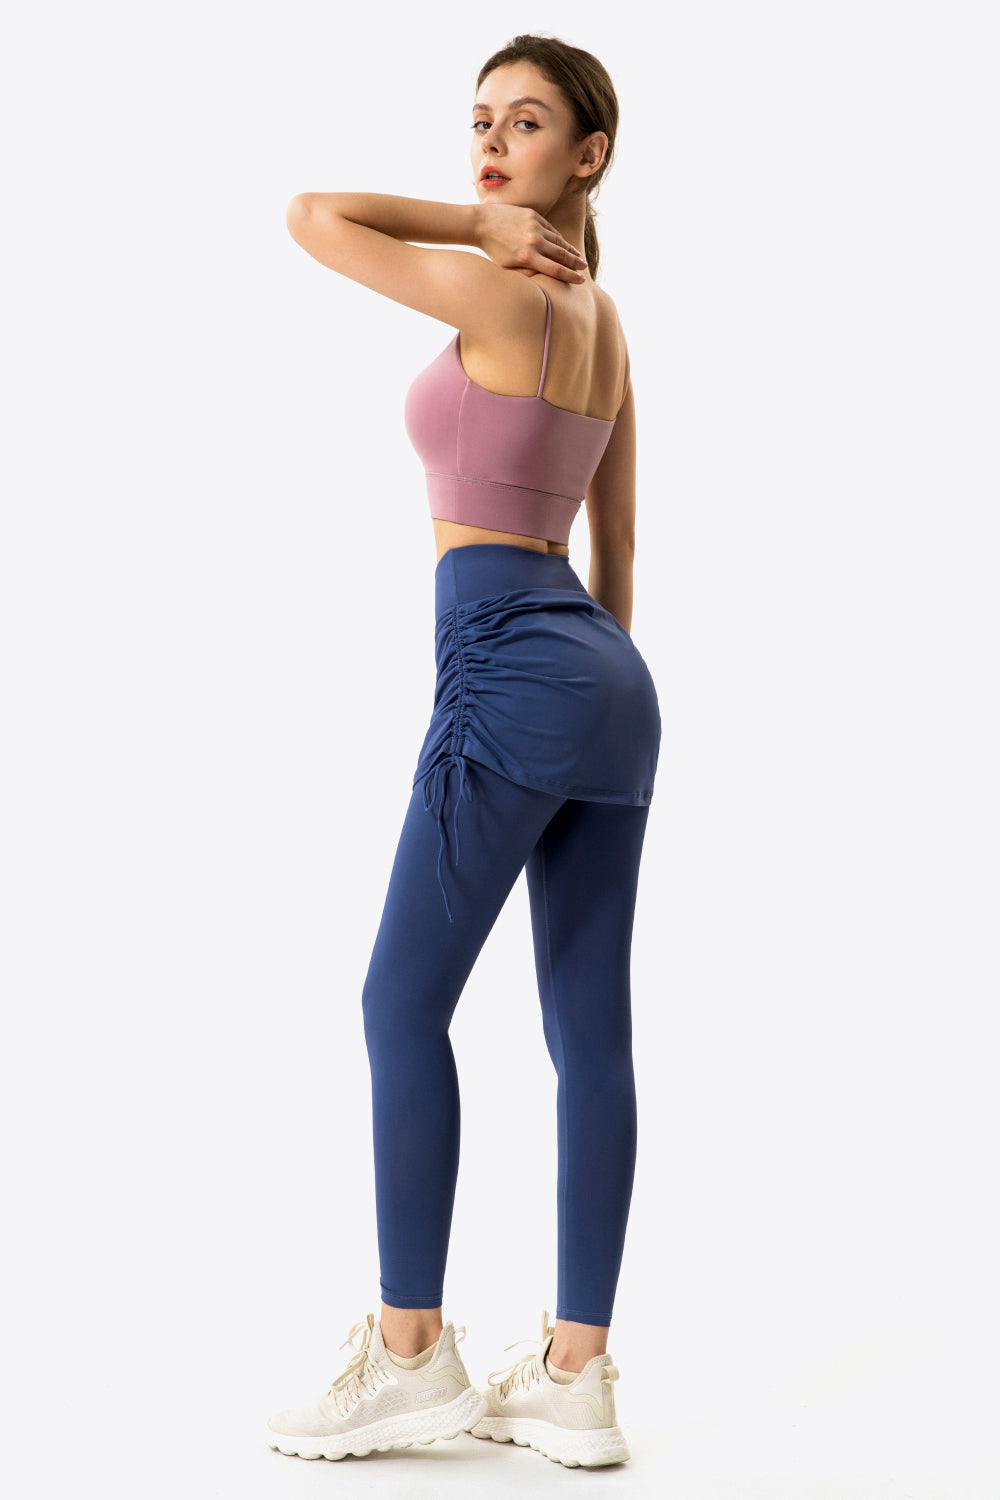 Drawstring Ruched Faux Layered Yoga Leggings - Kawaii Stop - Activewear, Comfortable Fit, Drawstring, Fitness Leggings, Leggings, Machine Washable, Modern Elegance, Polyester Blend, Ruched Design, Ship From Overseas, Solid Color, Spandex, Stylish Design, Trendy Details, Versatile Apparel, Women's Clothing, Yoga Leggings, ZJtree